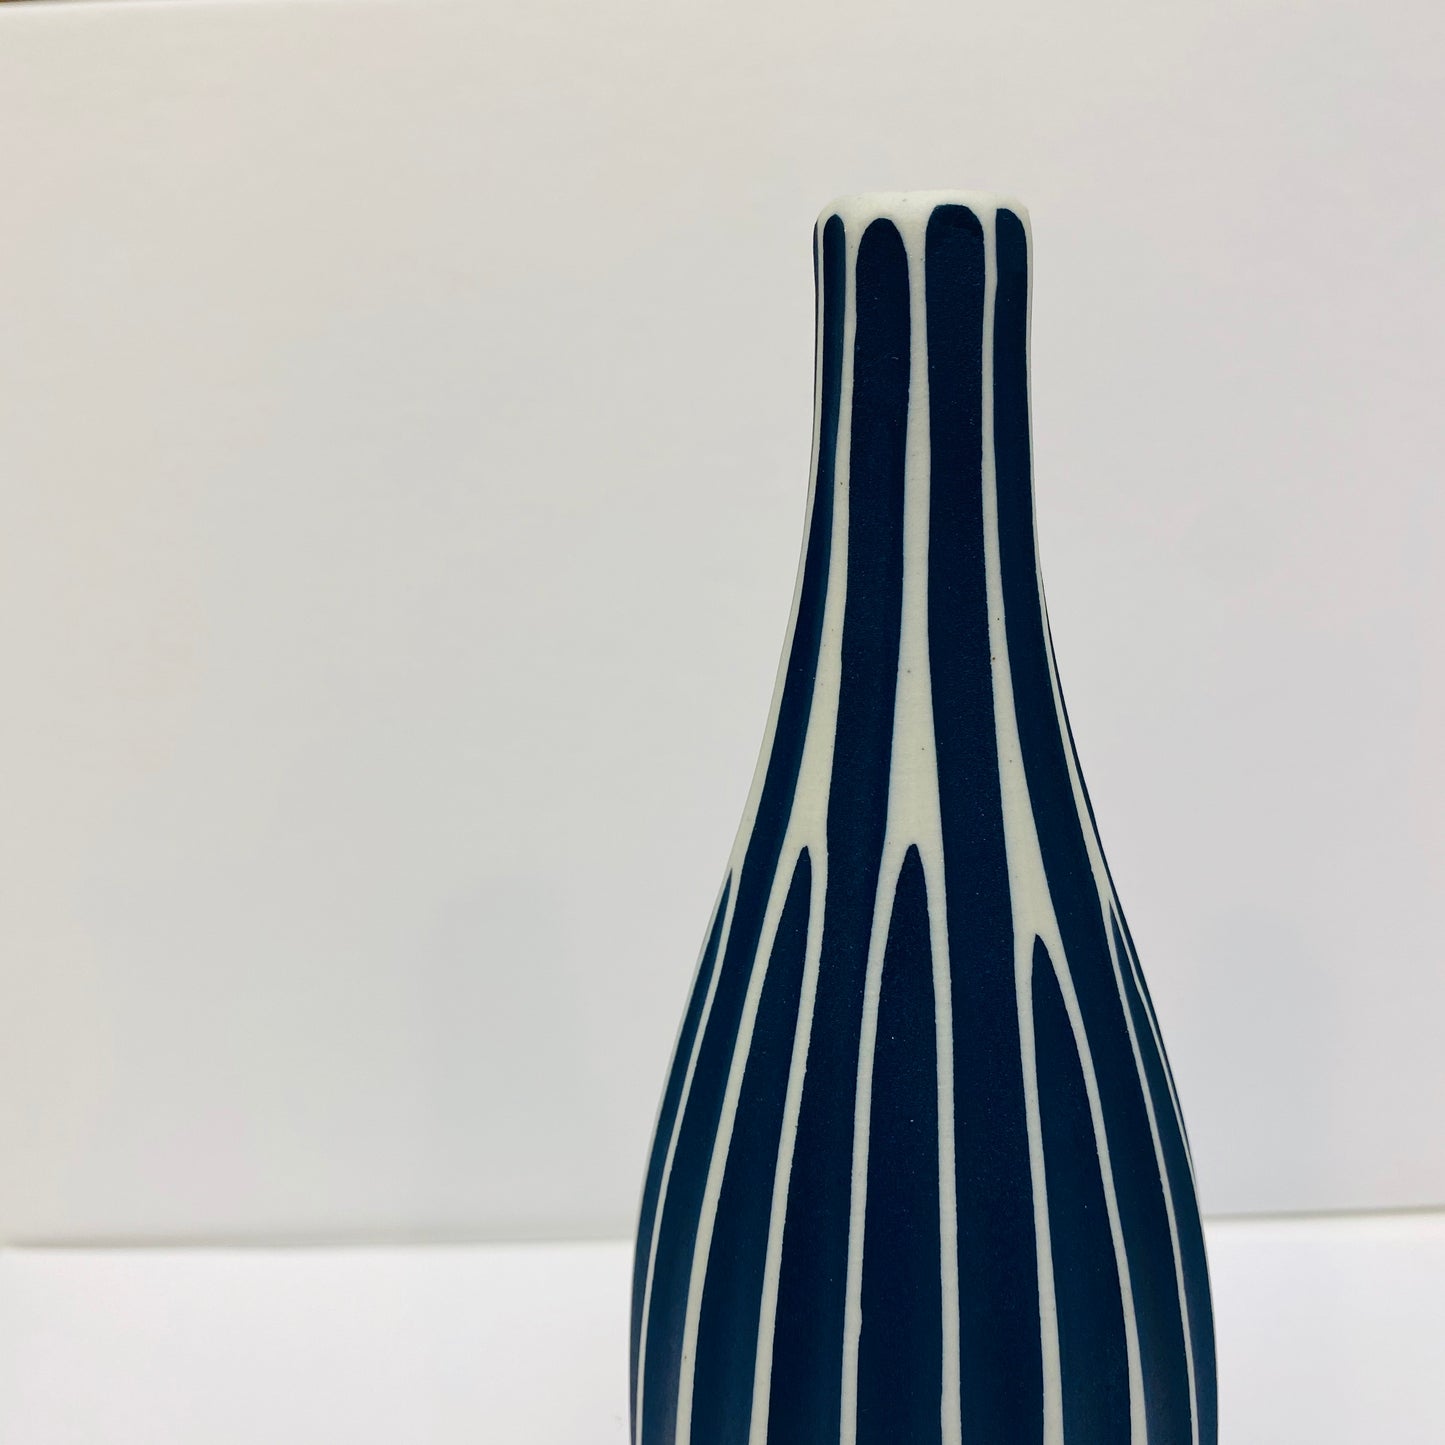 Small White and Blue Textured Bottle Vase